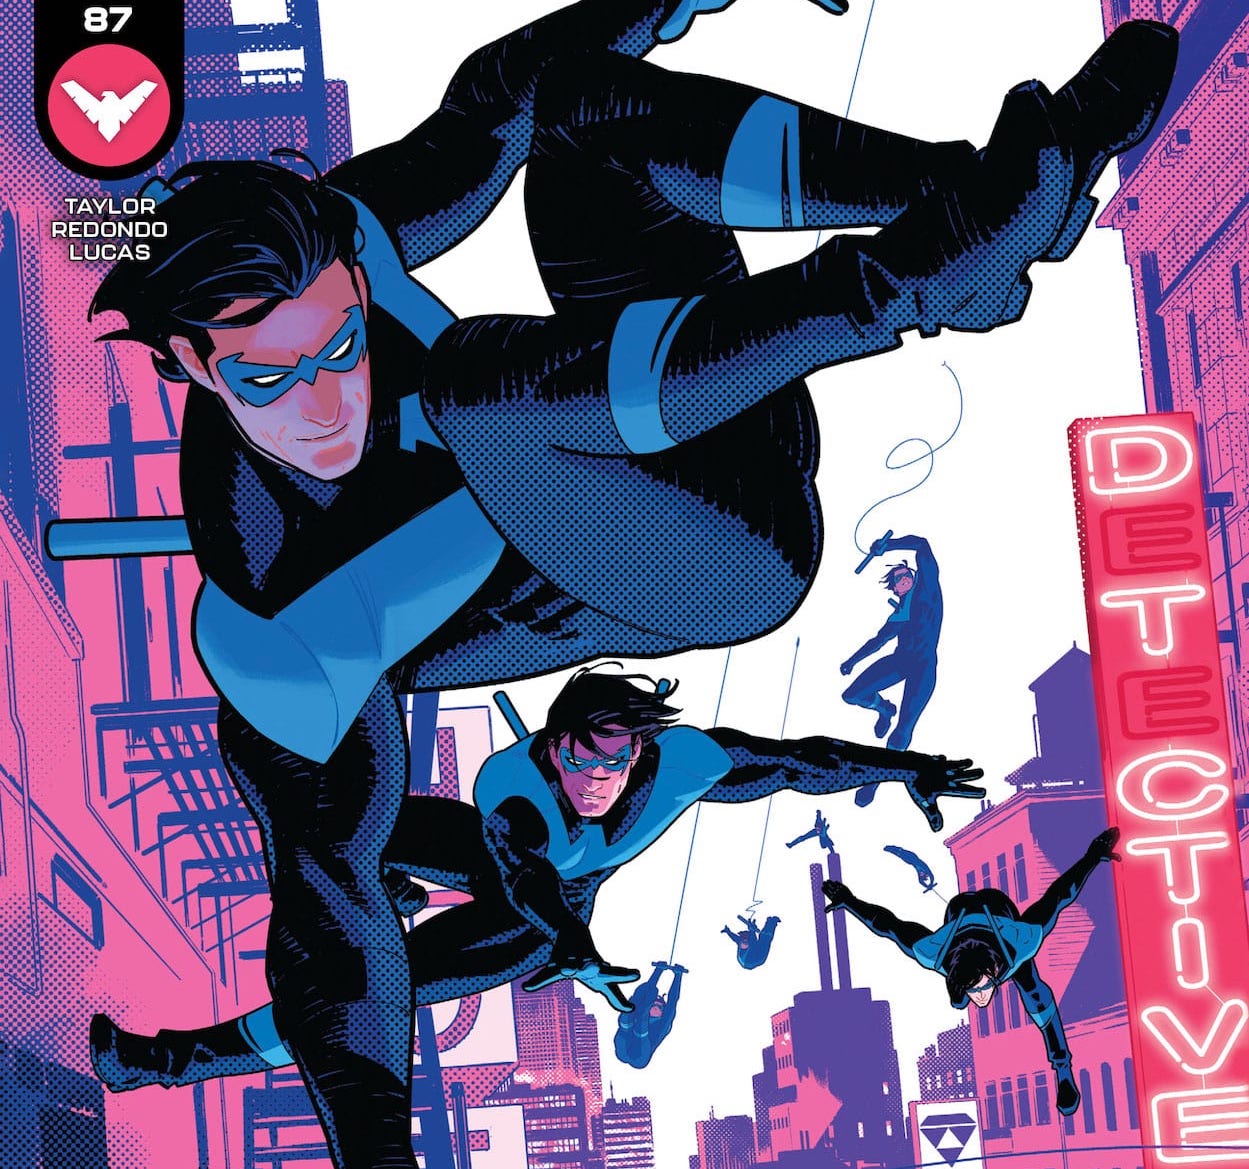 'Nightwing' #87 is an incredible visual masterpiece